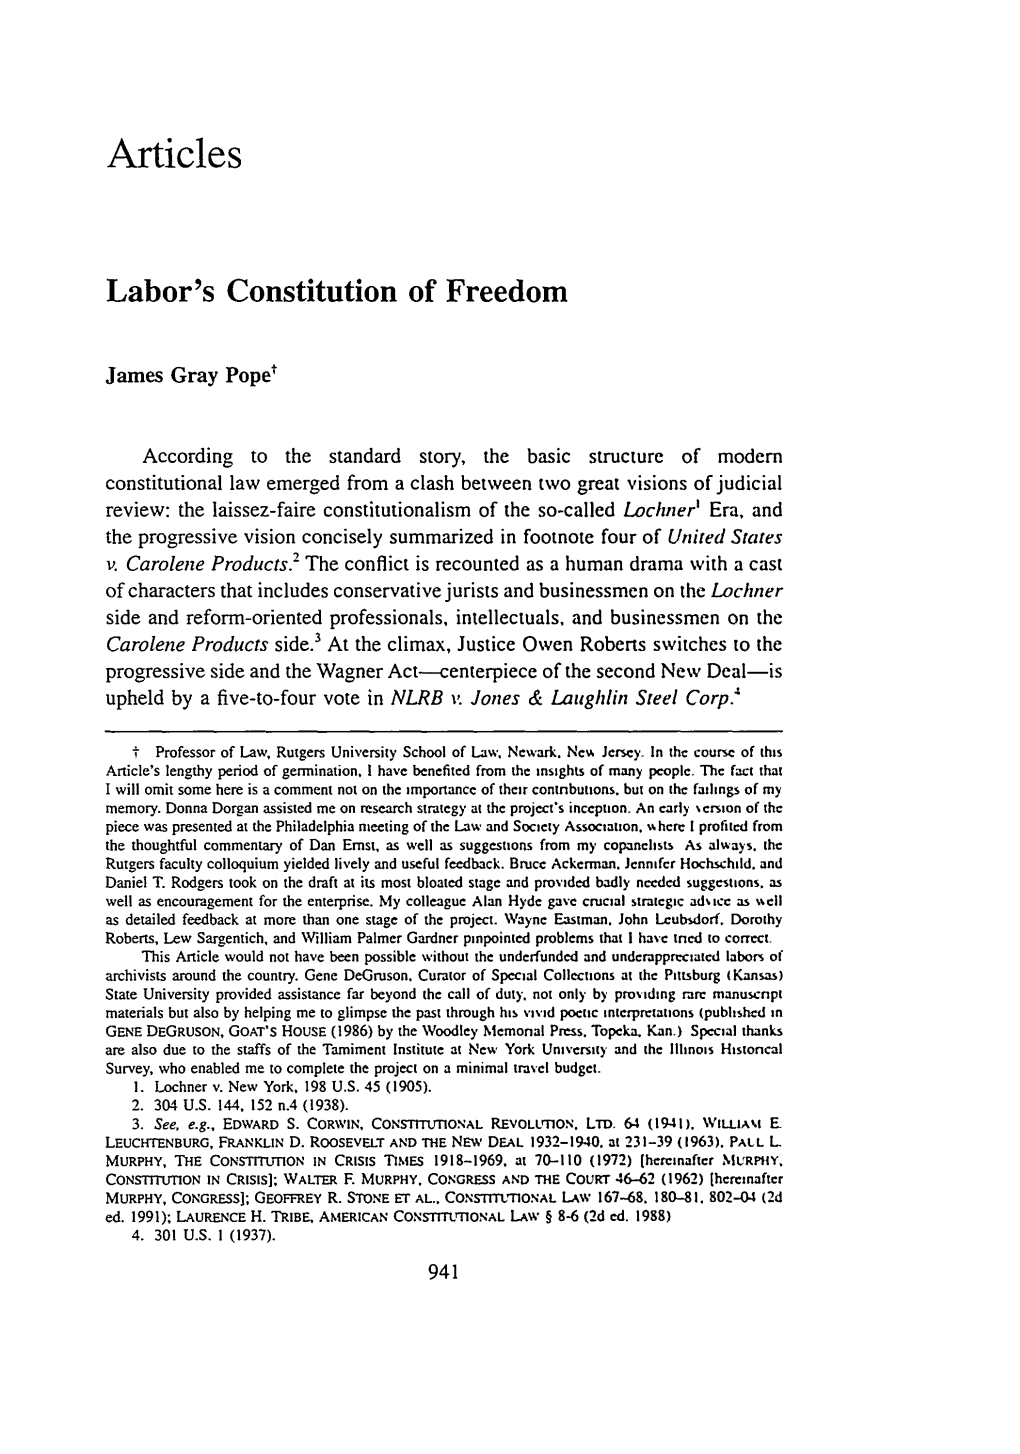 Labor's Constitution of Freedom